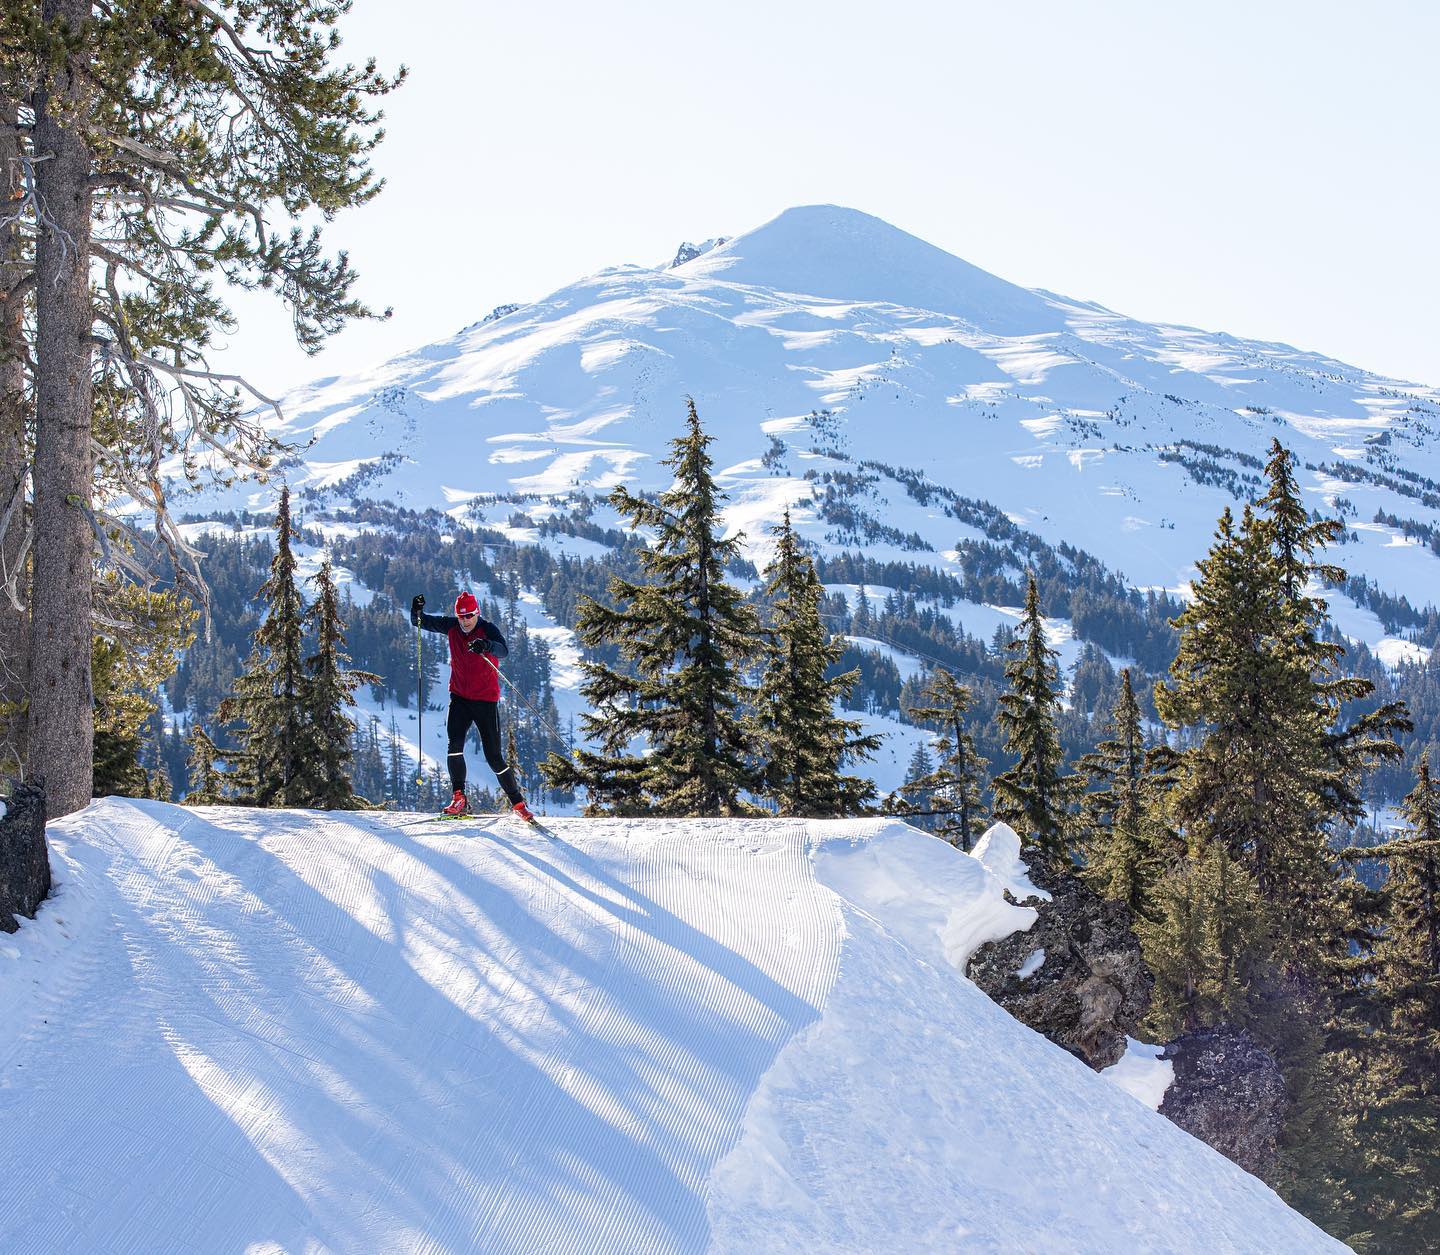 A skier at Mount Bachelor.